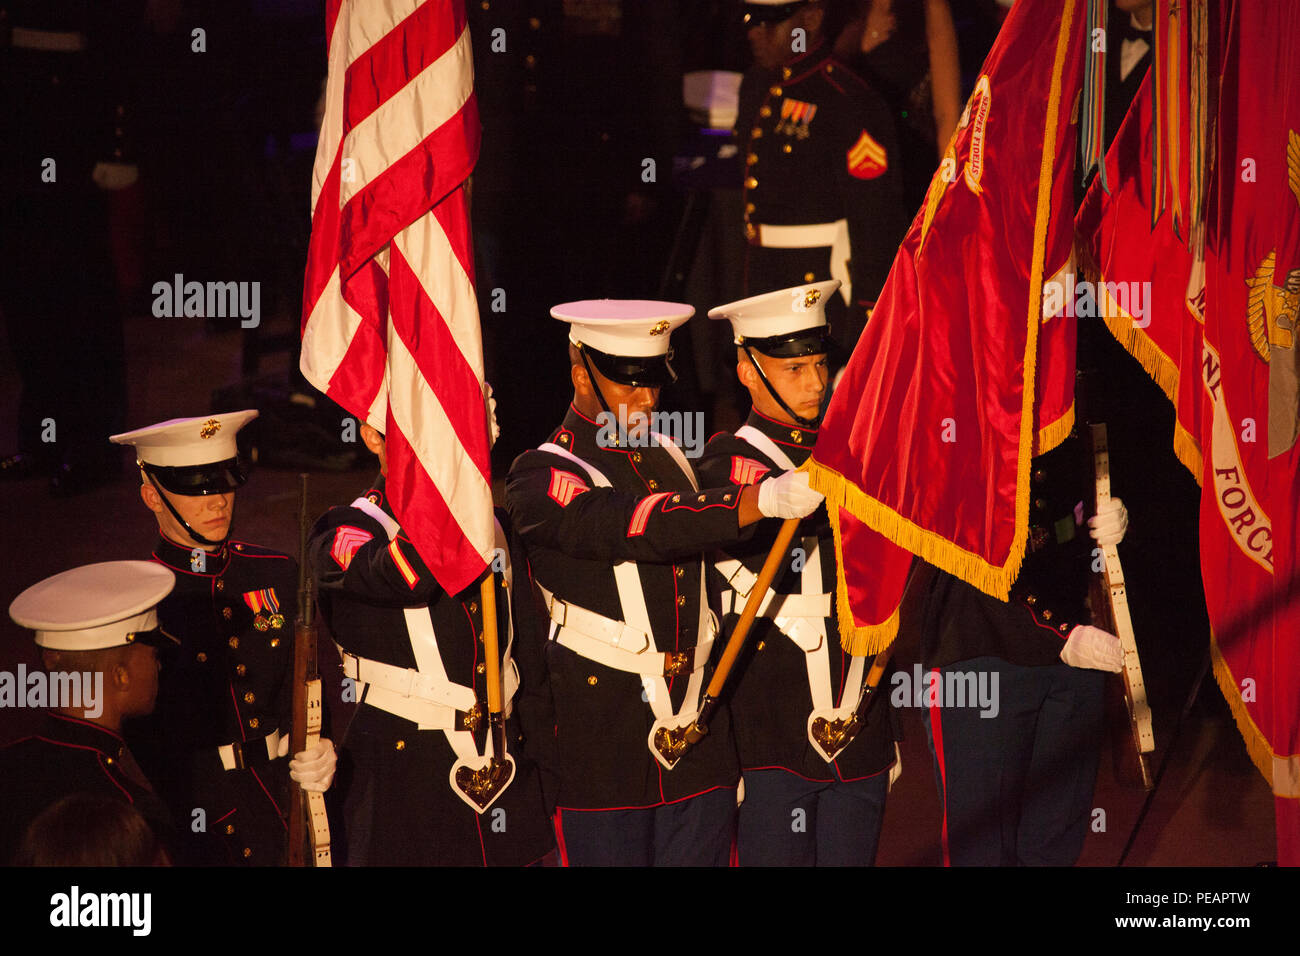 U.S. Marines with the Marine Forces Reserve color guard present the colors during the playing of the National Anthem during the celebration of the 240th Marine Corps Birthday Ball at Mardi Gras World, New Orleans, La., Nov 21, 2015. This year’s celebration honors those past, present, and future Marines throughout history and marks the 240th Marine Corps Birthday since its founding on Nov. 10, 1775. (U.S. Marine Corps photo by Kimberly Aguirre/Released) Stock Photo